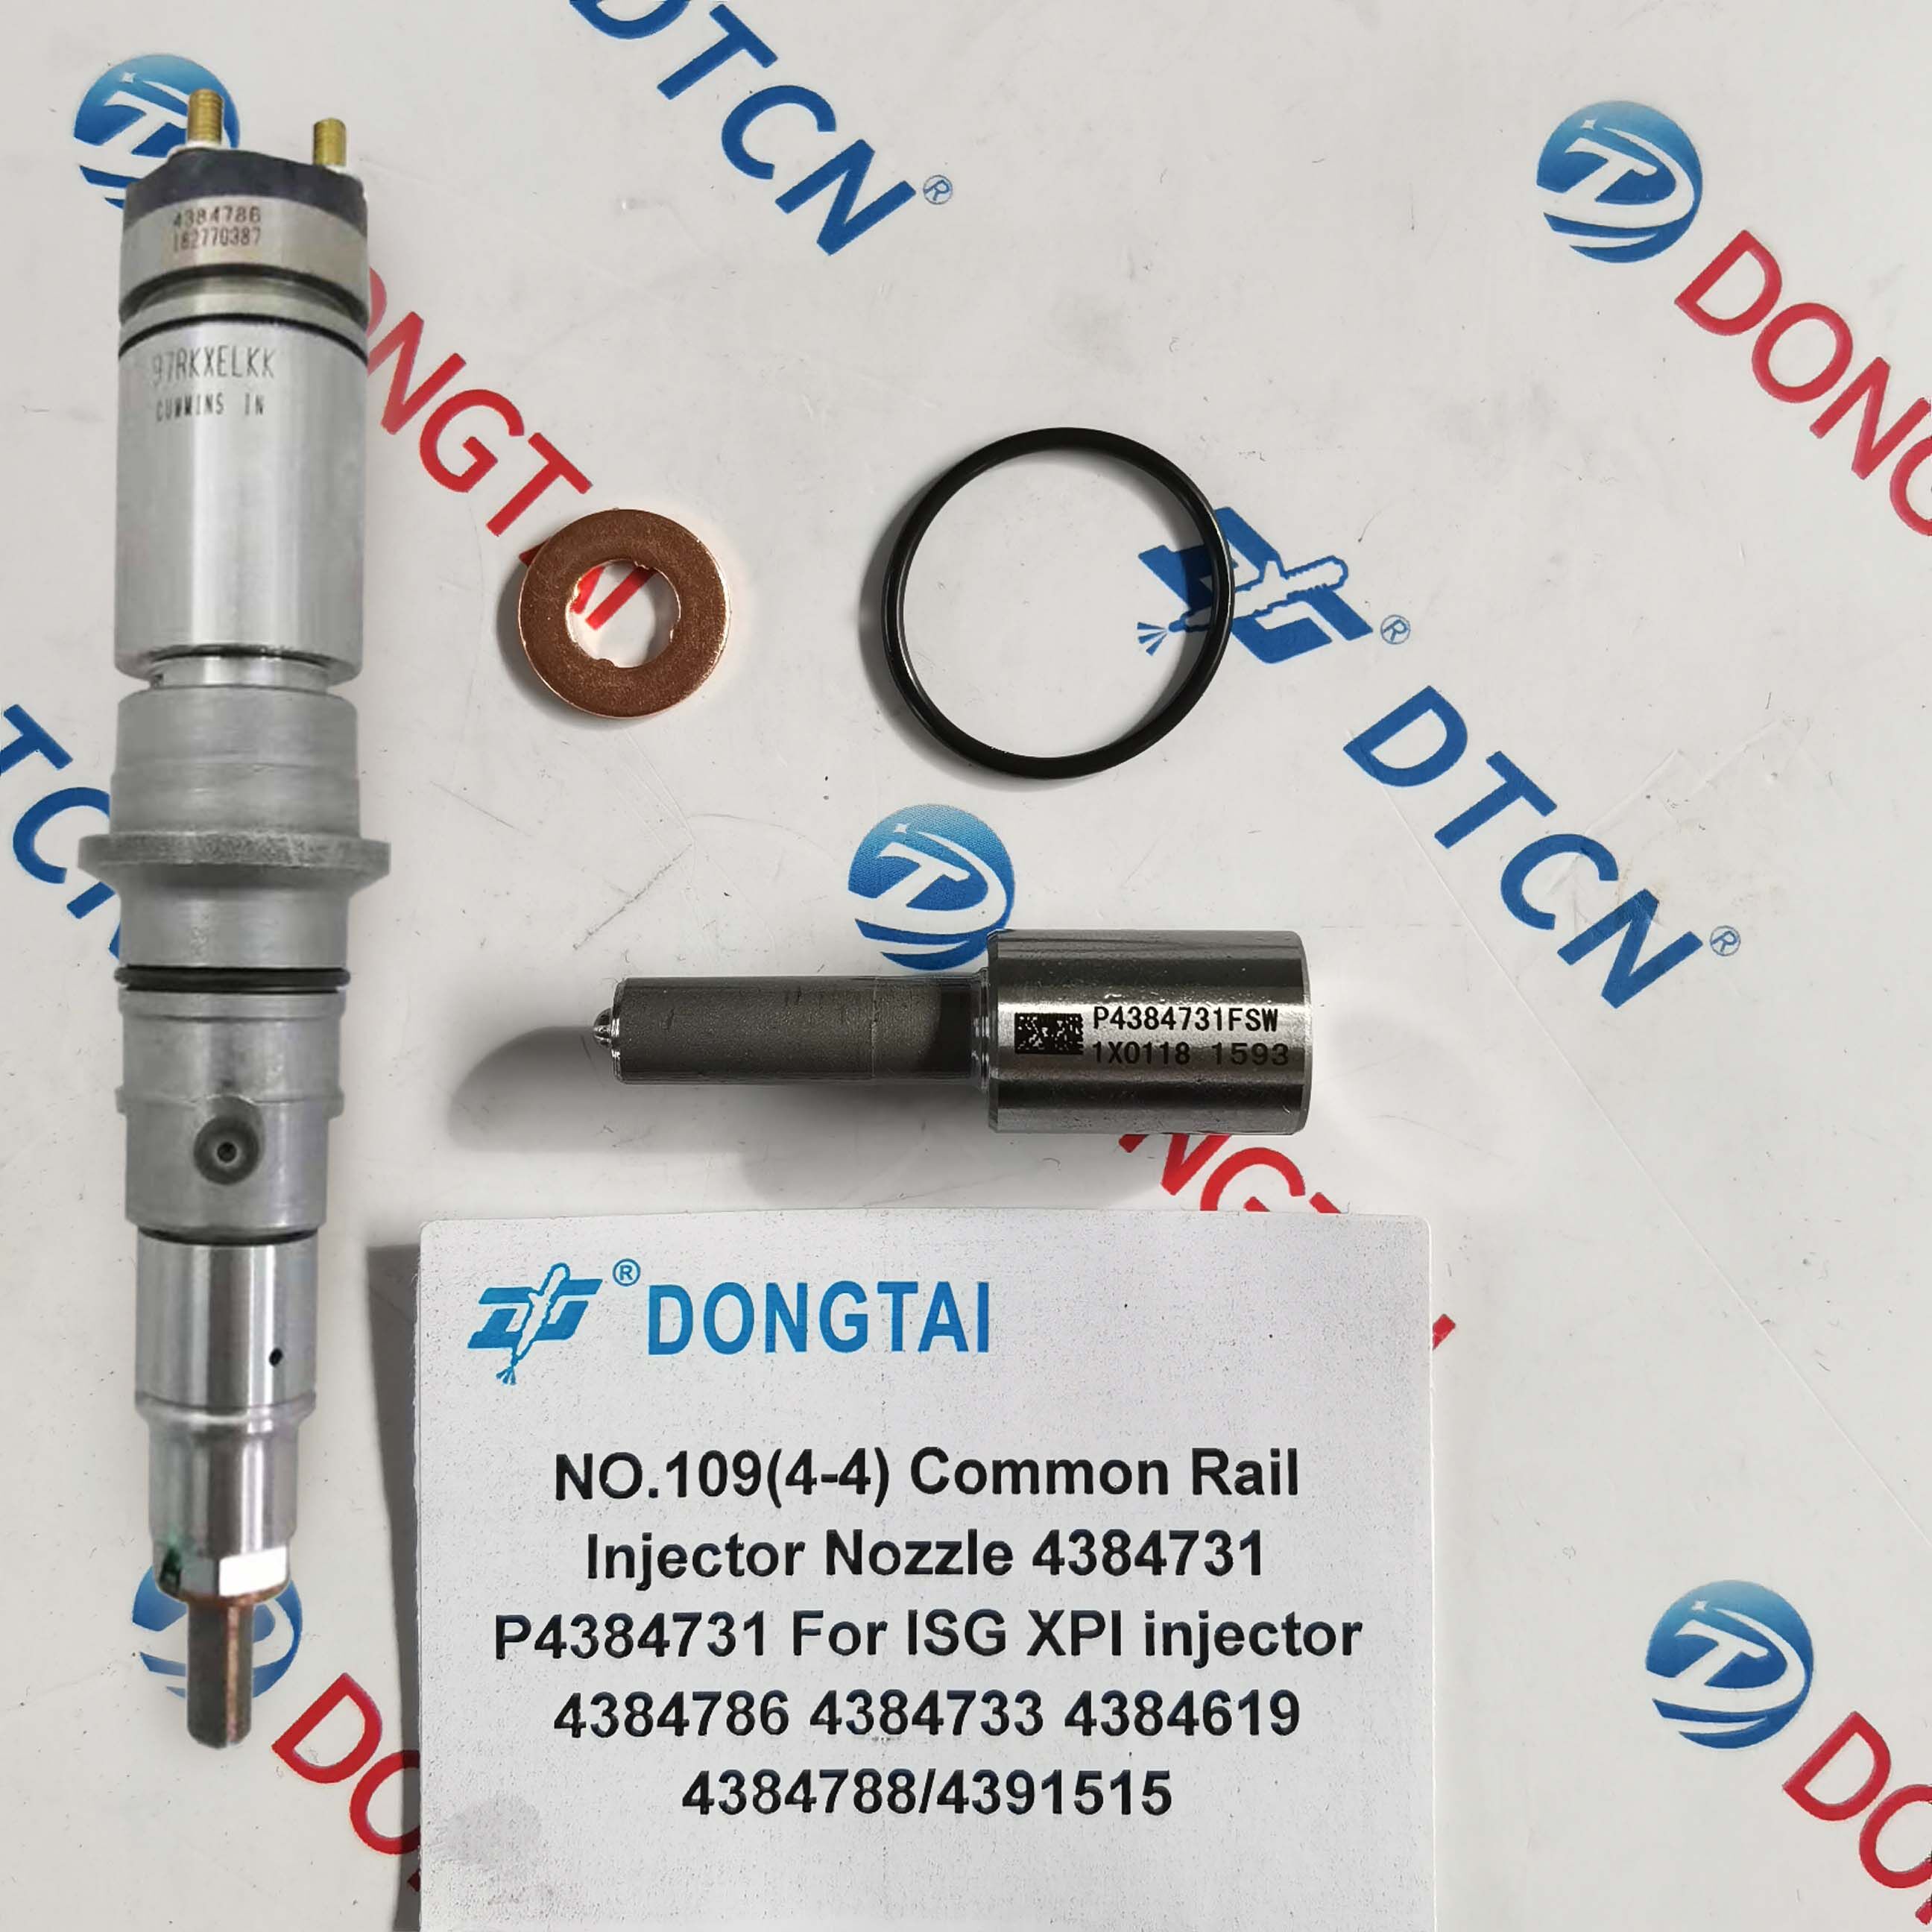 NO.109(4-4A) Common Rail Injector Nozzle 4384731 P4384731 For ISG XPI injector 4384786 4384733 4384619 4384788/4391515 